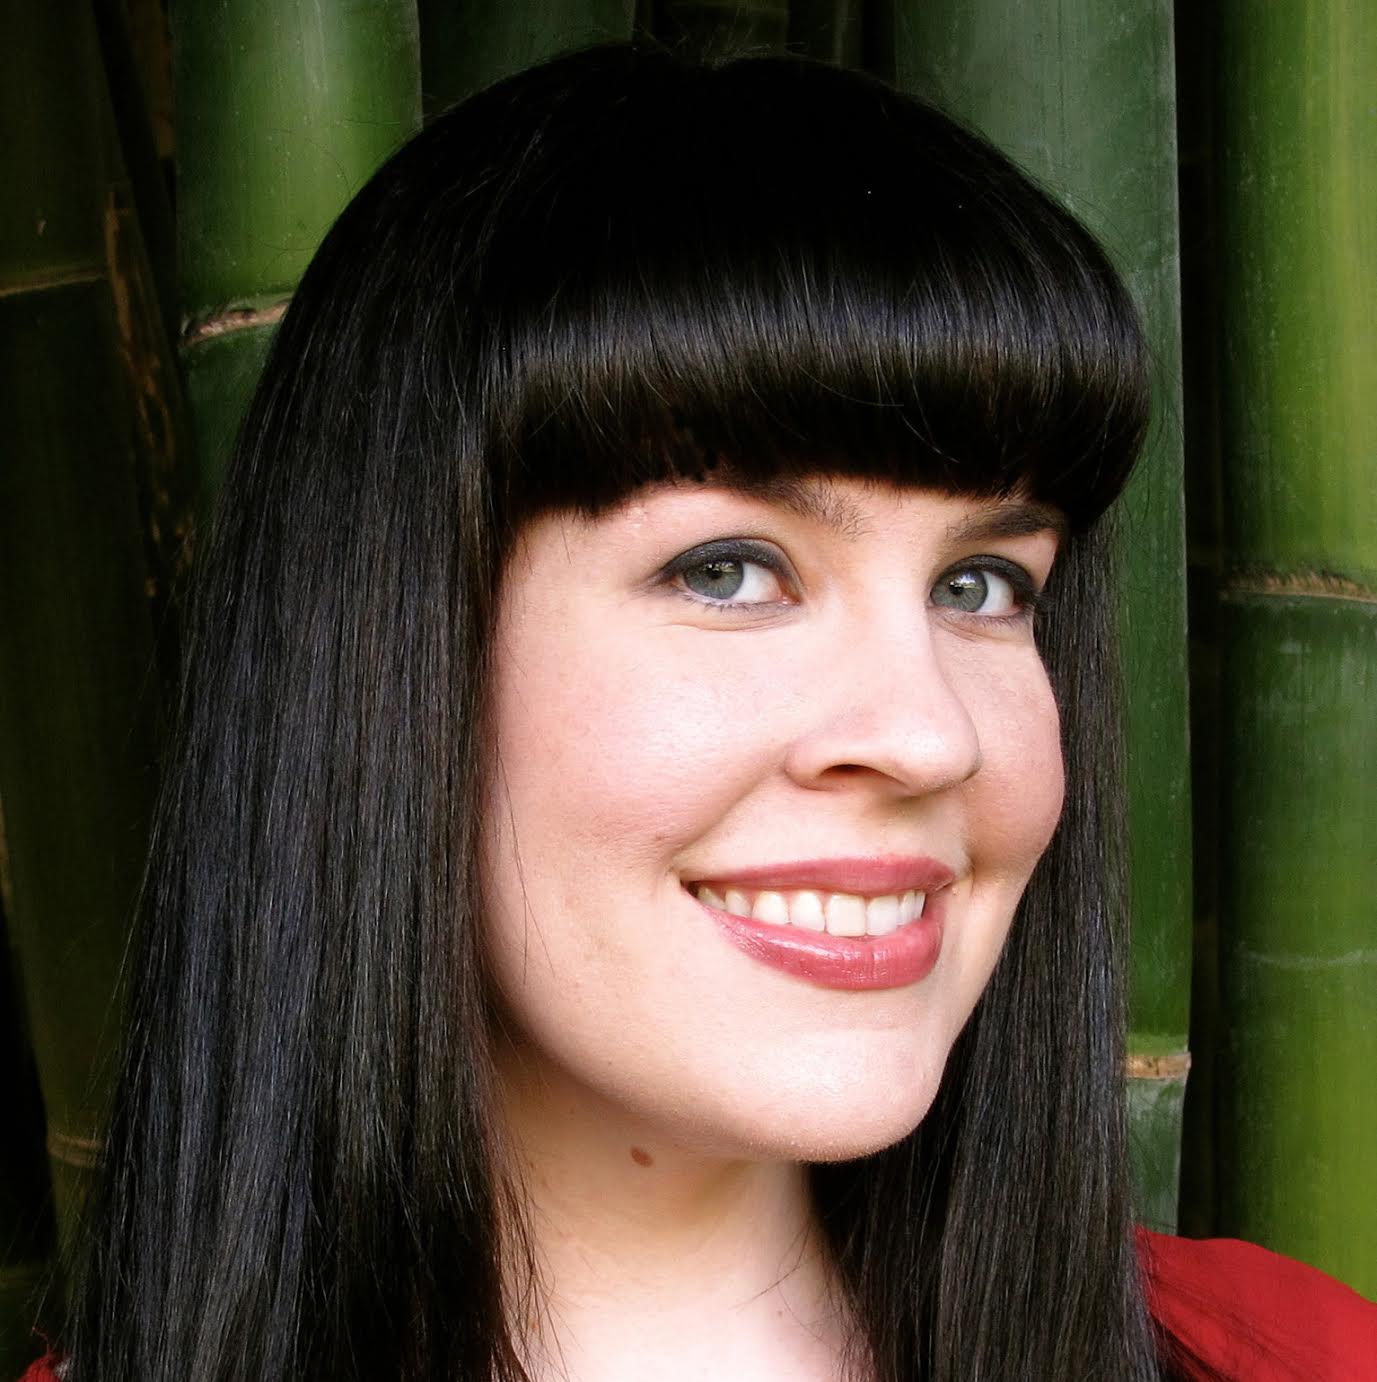 Arts Interview: Caitlin Doughty | It’s A Question Of Balance 26 September 2015